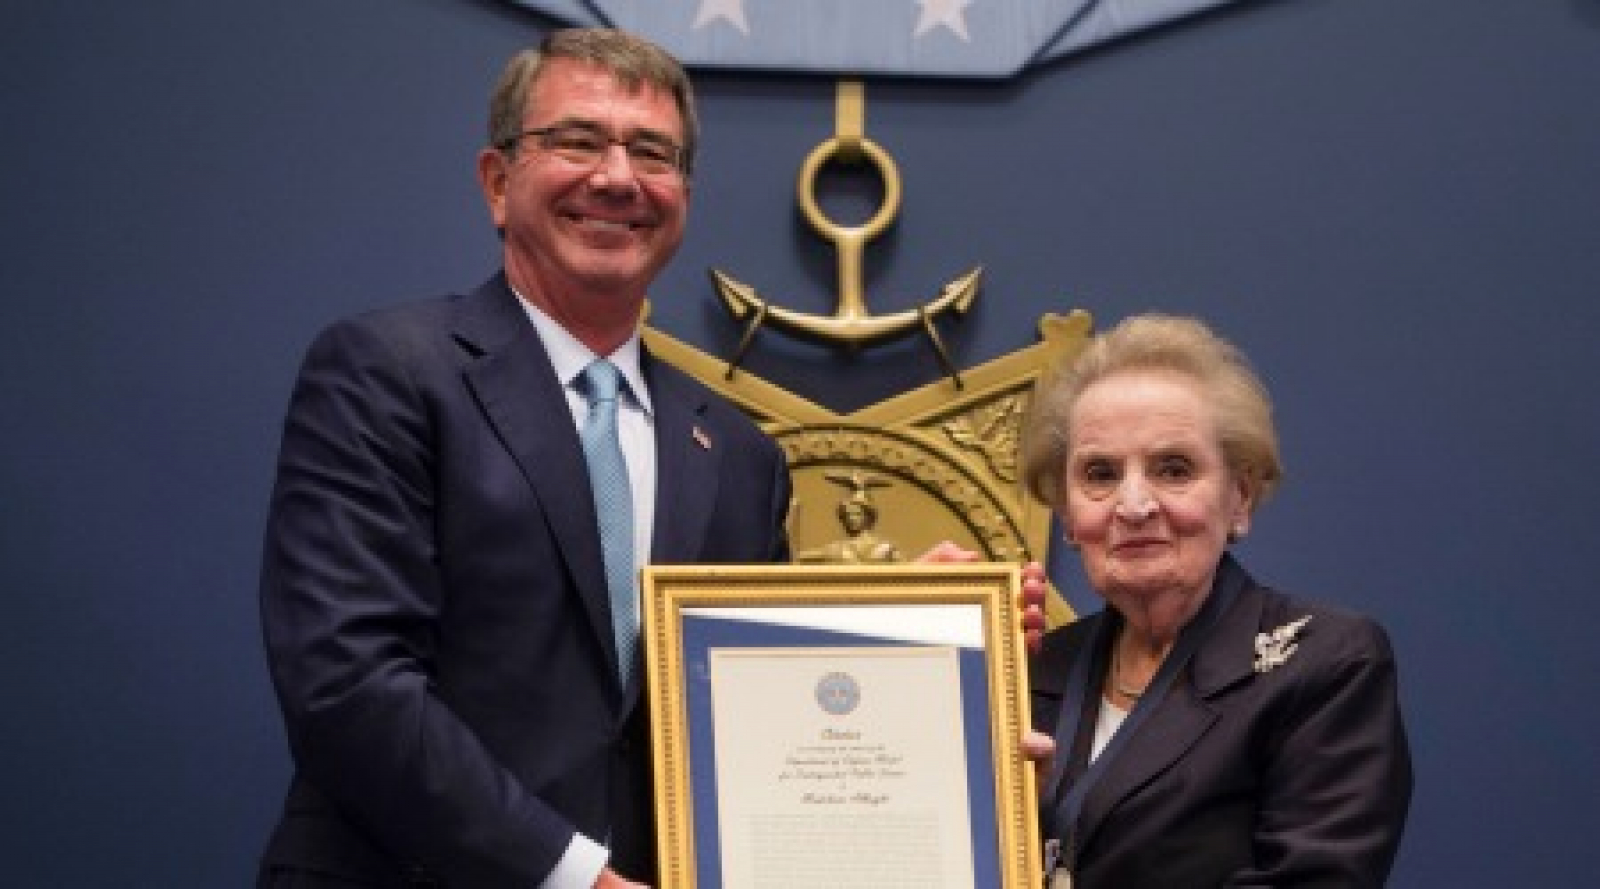 NDI Chairman Madeleine Albright Receives DOD Award for Distinguished Public Service